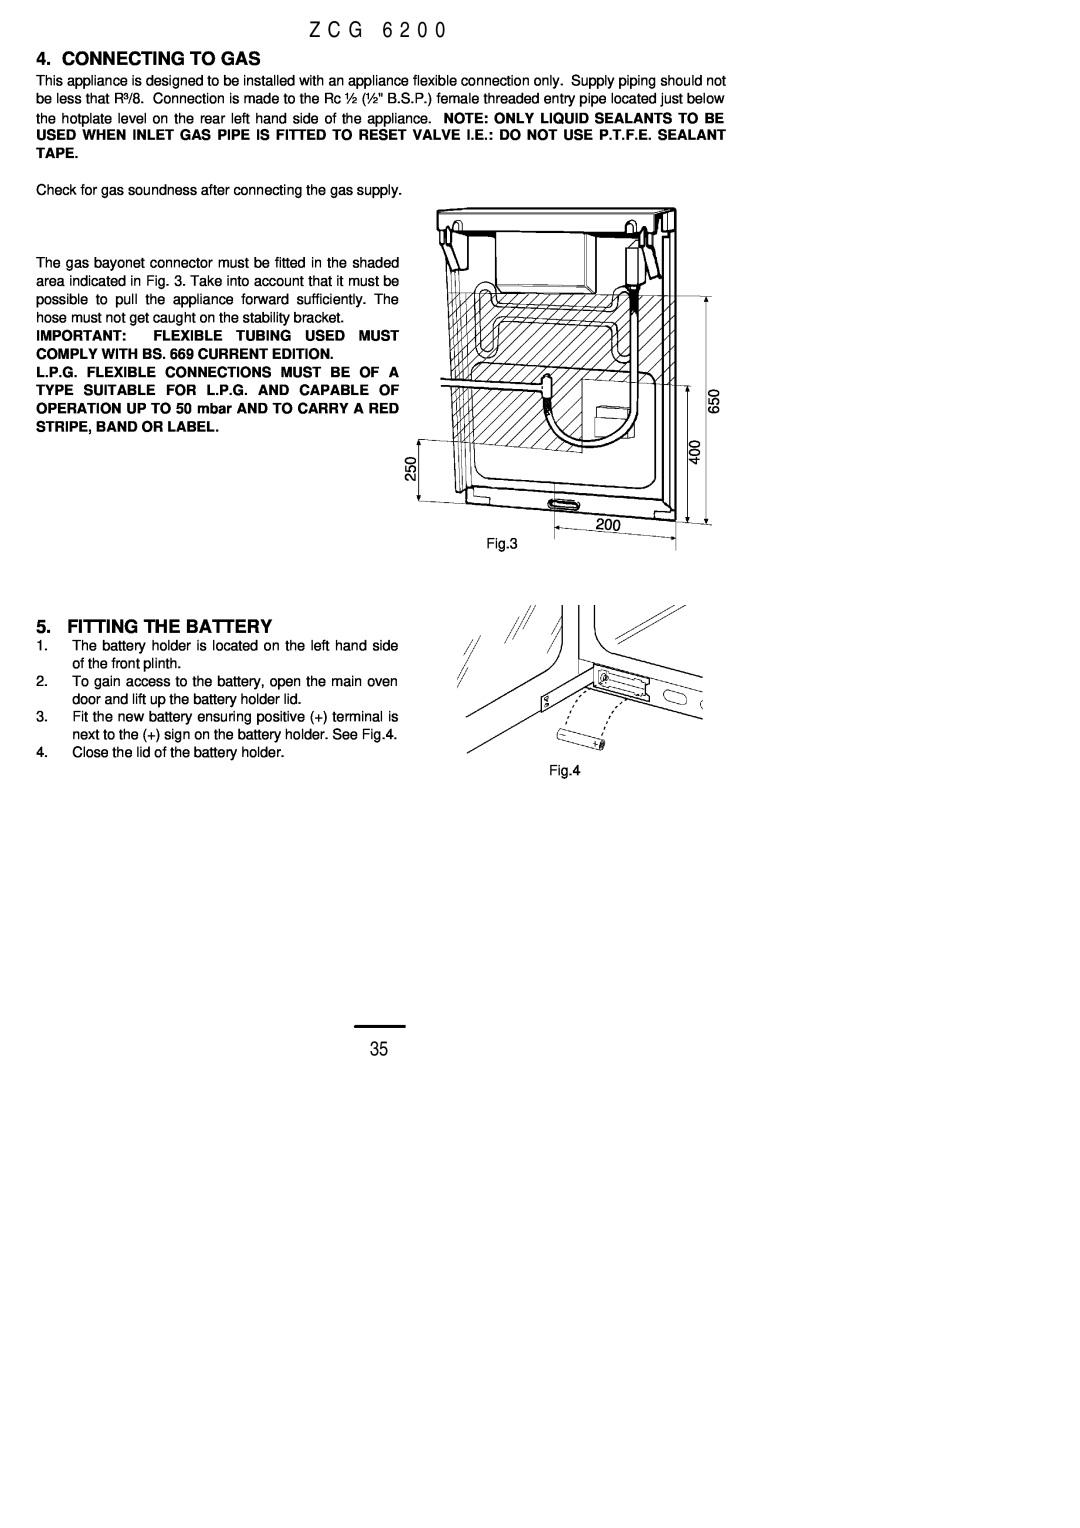 Zanussi ZCG 6200 installation instructions Z C G, Connecting To Gas, Fitting The Battery 